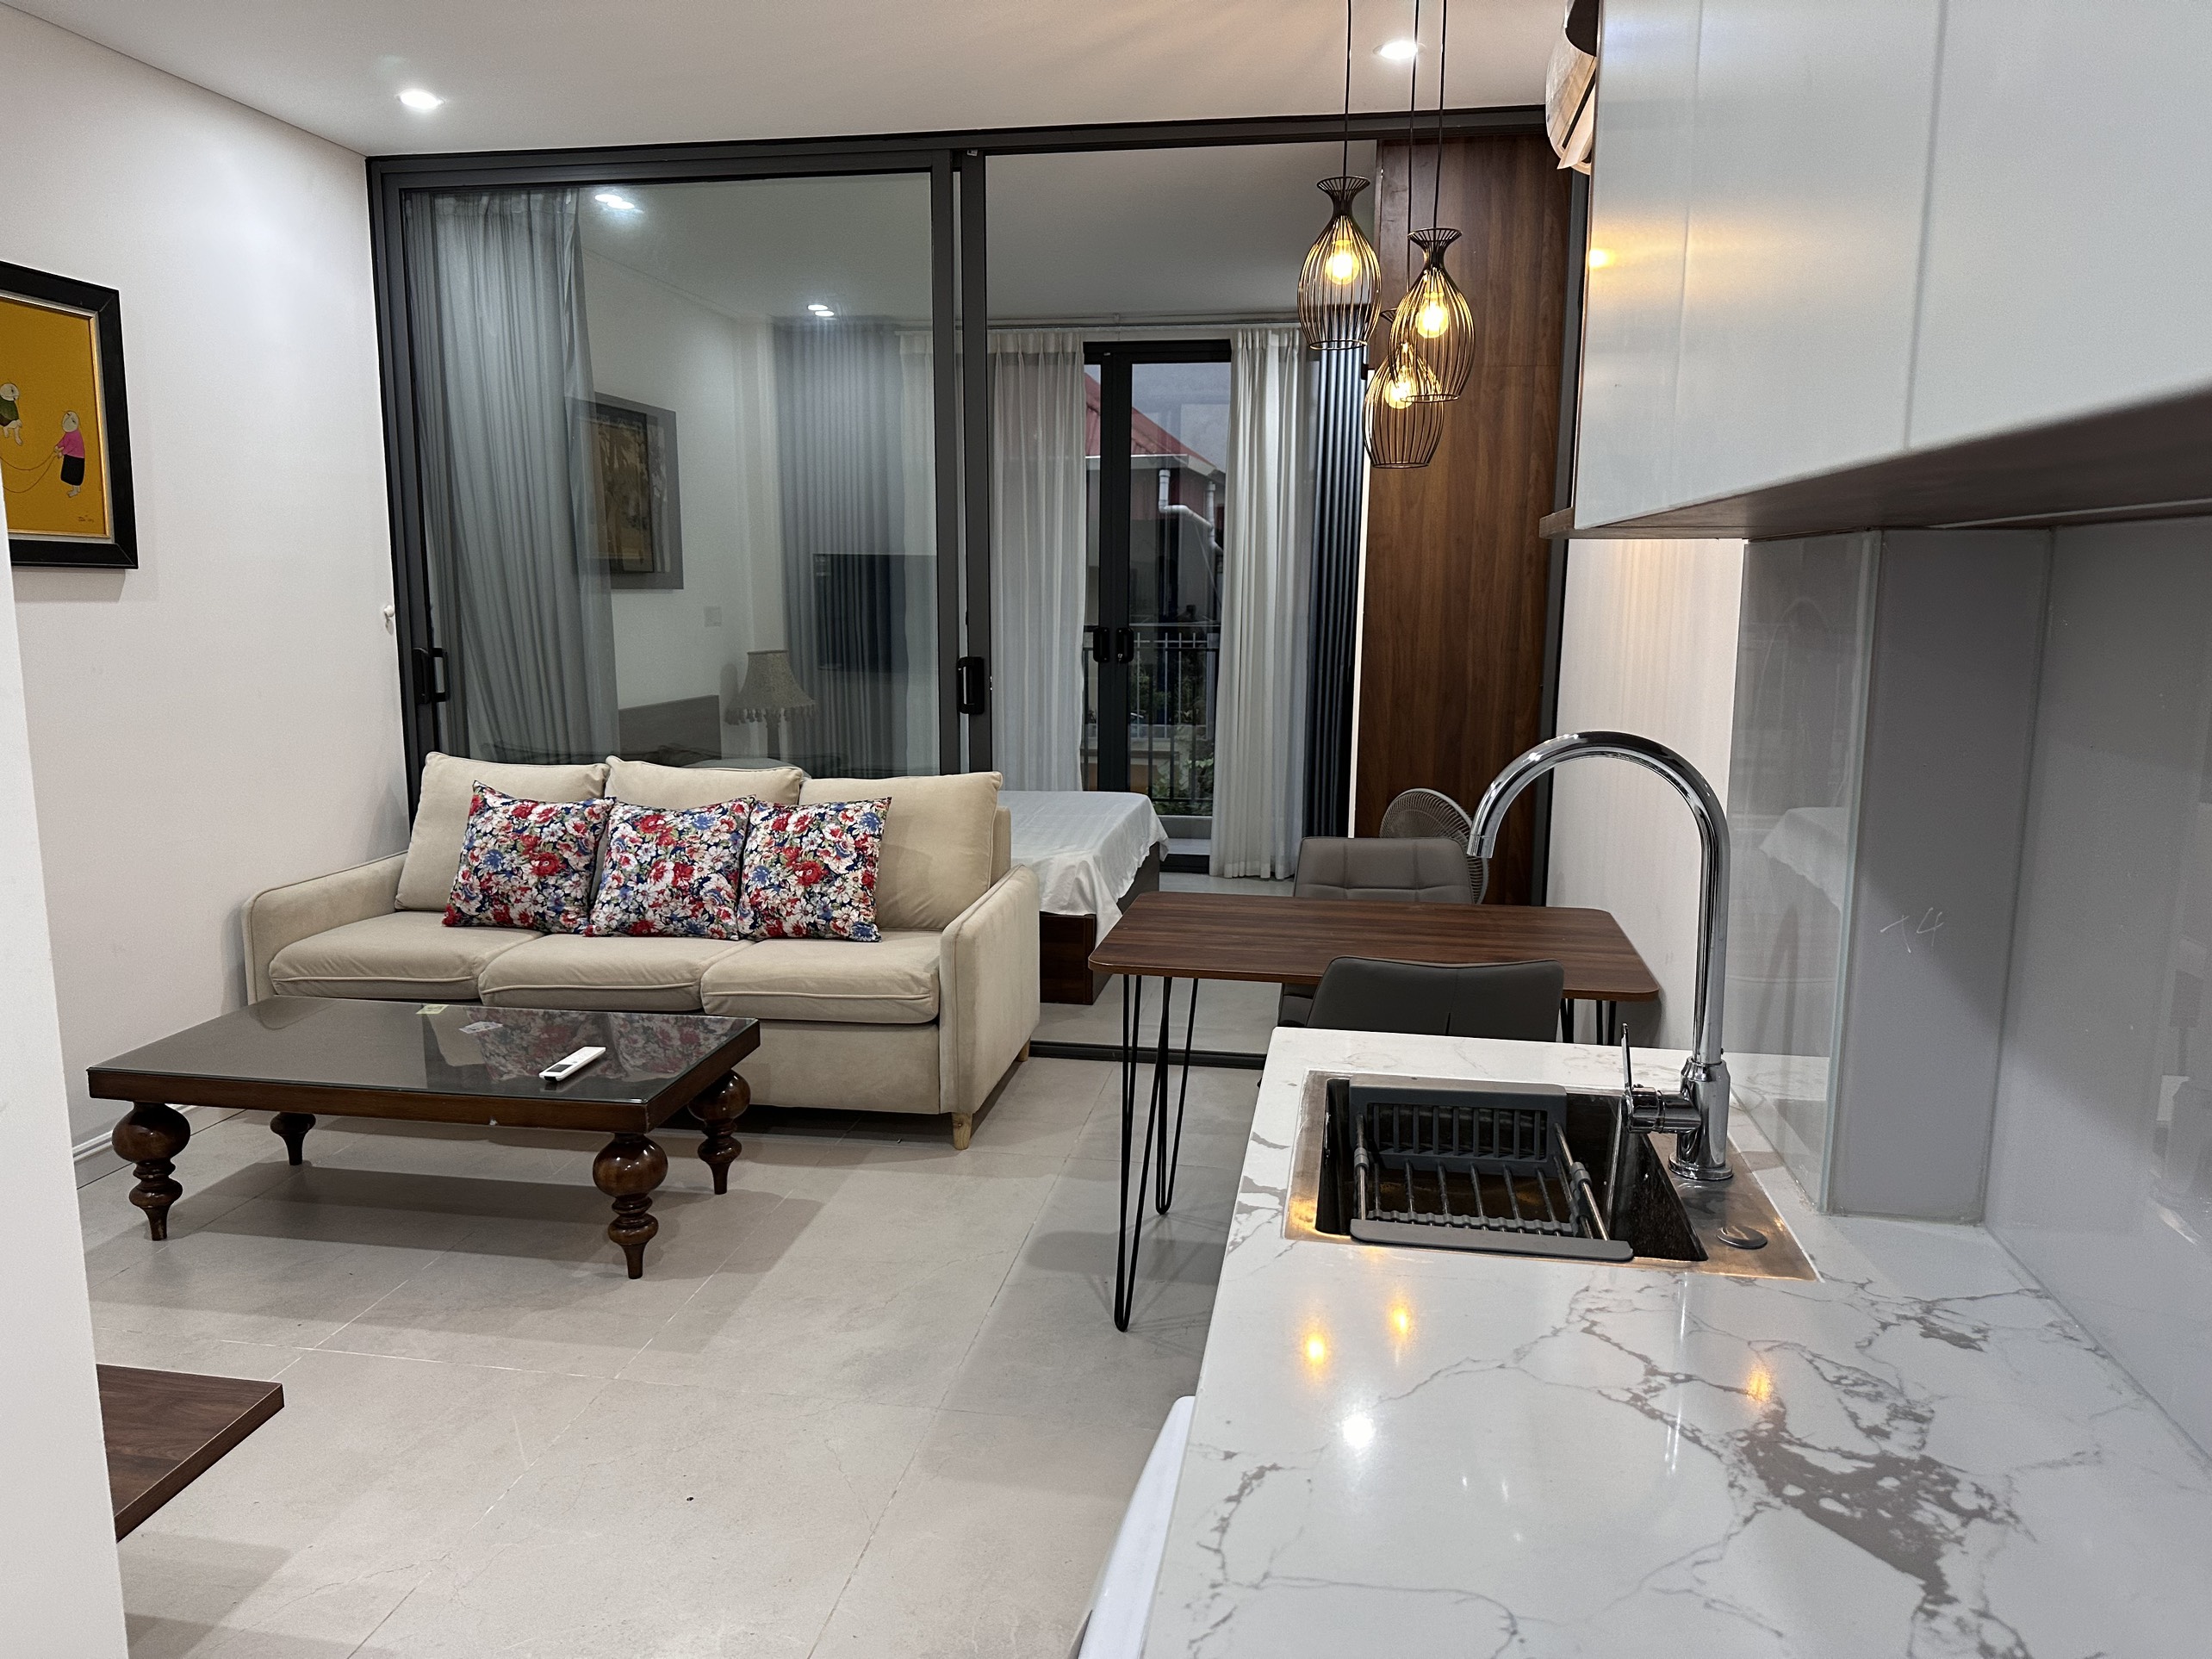 Budget Price & Modern Apartment for rent in Hoang Hoa Tham str, Ba Dinh